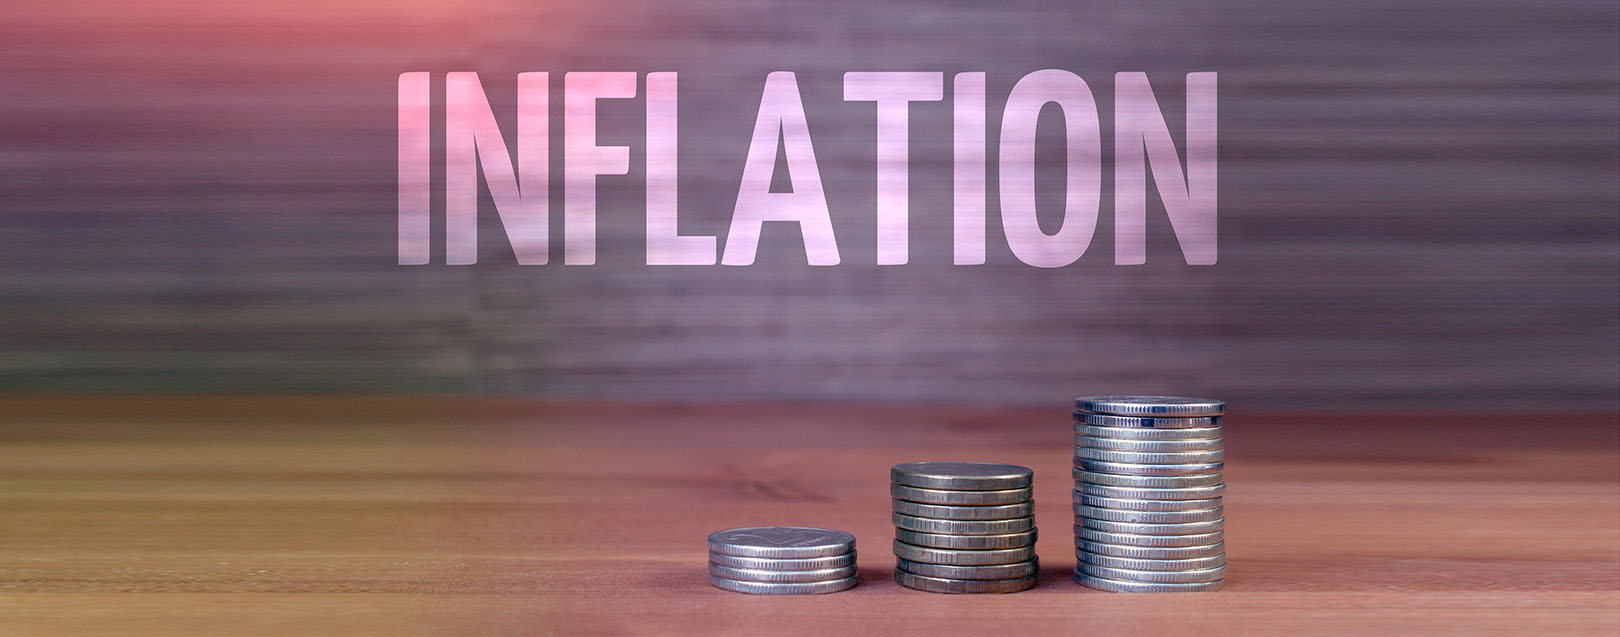 The Return of Inflation March 2018 issue